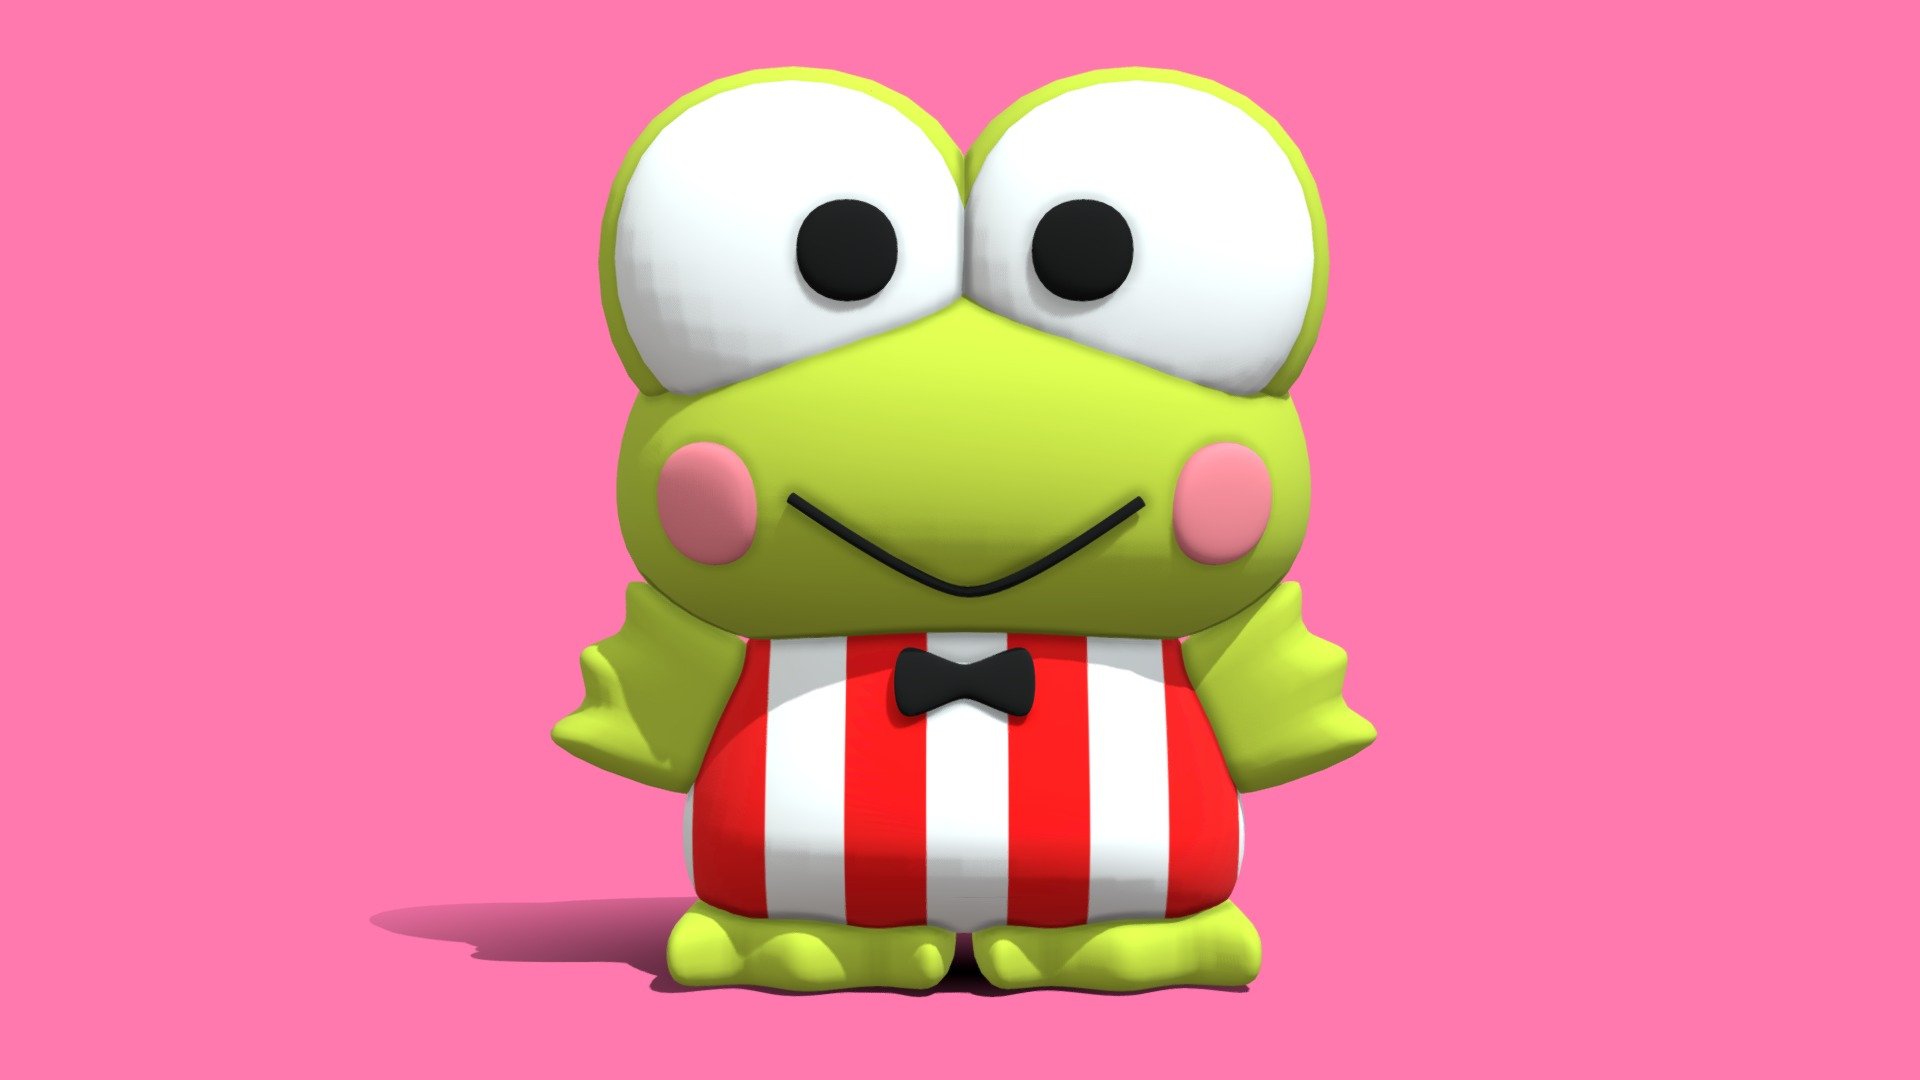 A simple and cute 3D model of popular Sanrio character Kero Kero Keroppi.

File Formats





FBX - Rigged




glTF - Rigged




OBJ




STL




Native 3.5 Blender File



STL is recomended for 3D printing

Polygons:
14,168

Vertices:
7,096 - Sanrio Kero Kero Keroppi 3D Model - Buy Royalty Free 3D model by SirSquiggles 3d model